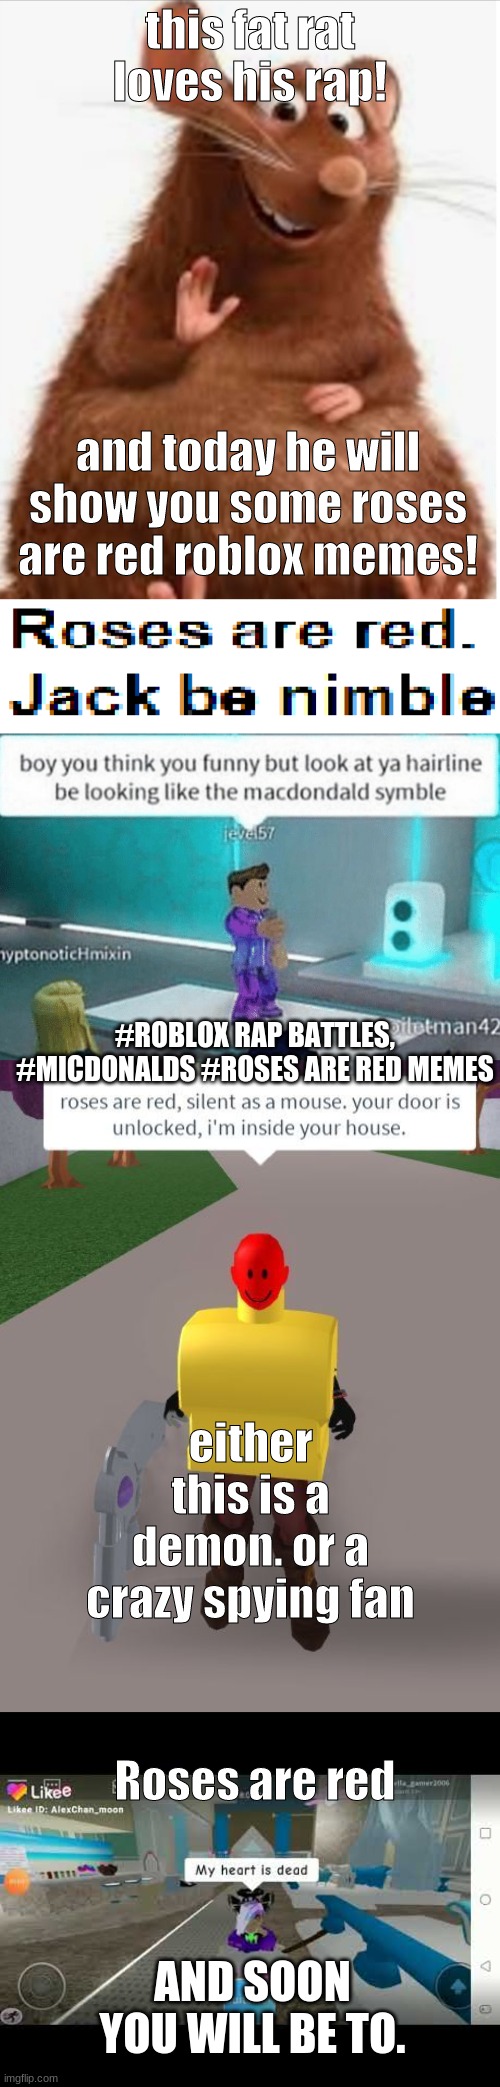 this fat rat loves his rap! and today he will show you some roses are red roblox memes! #ROBLOX RAP BATTLES, #MICDONALDS #ROSES ARE RED MEMES; either this is a demon. or a crazy spying fan; Roses are red; AND SOON YOU WILL BE TO. | image tagged in fat rat,roses are red,roblox,roblox meme,rap battle | made w/ Imgflip meme maker